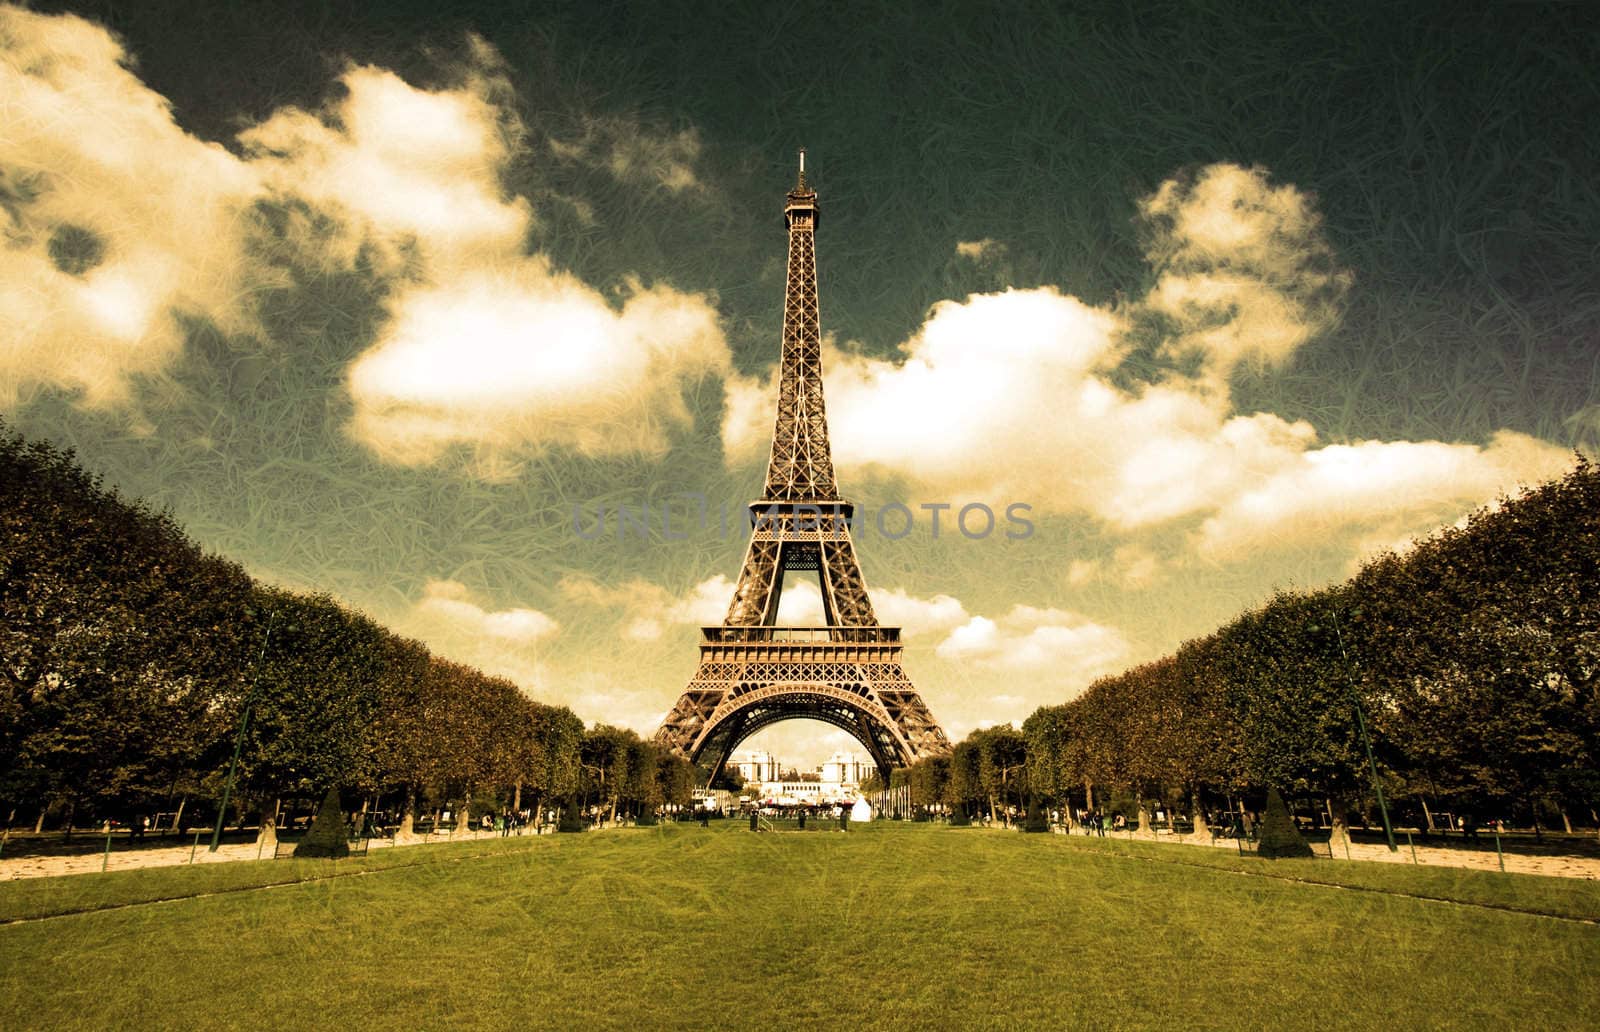 Grunge sepia photo of the Eiffel tower in Paris with washed out textures and wide angle central perspective.